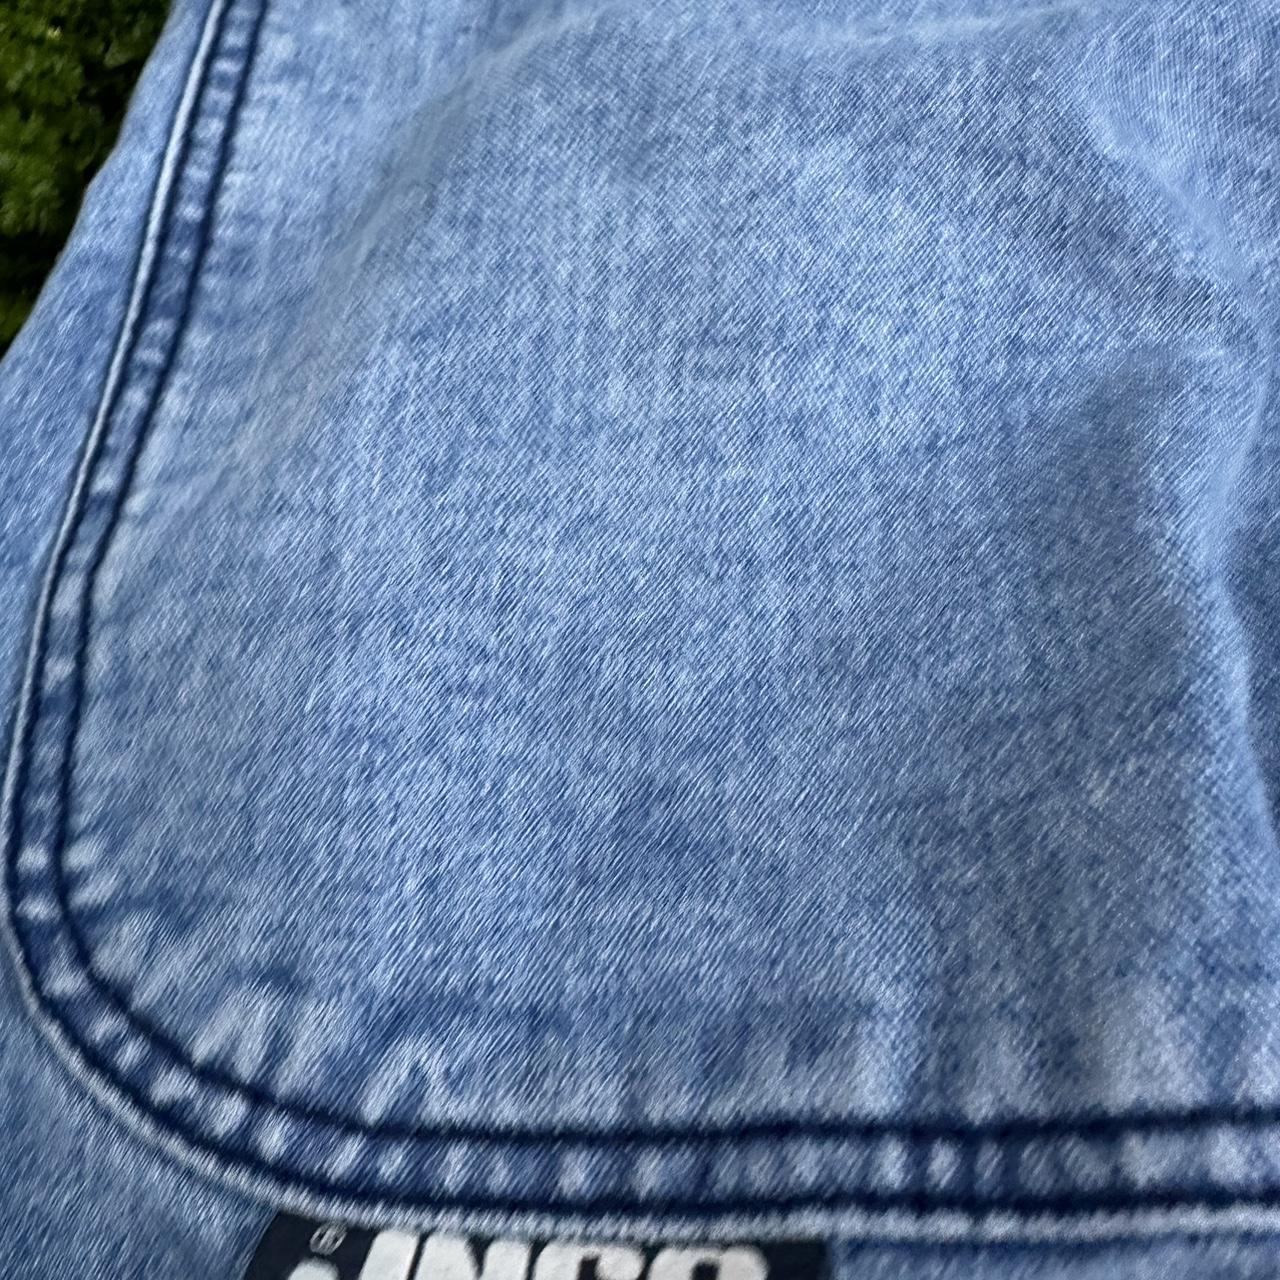 jnco pants little holes nothing crazy good quality... - Depop